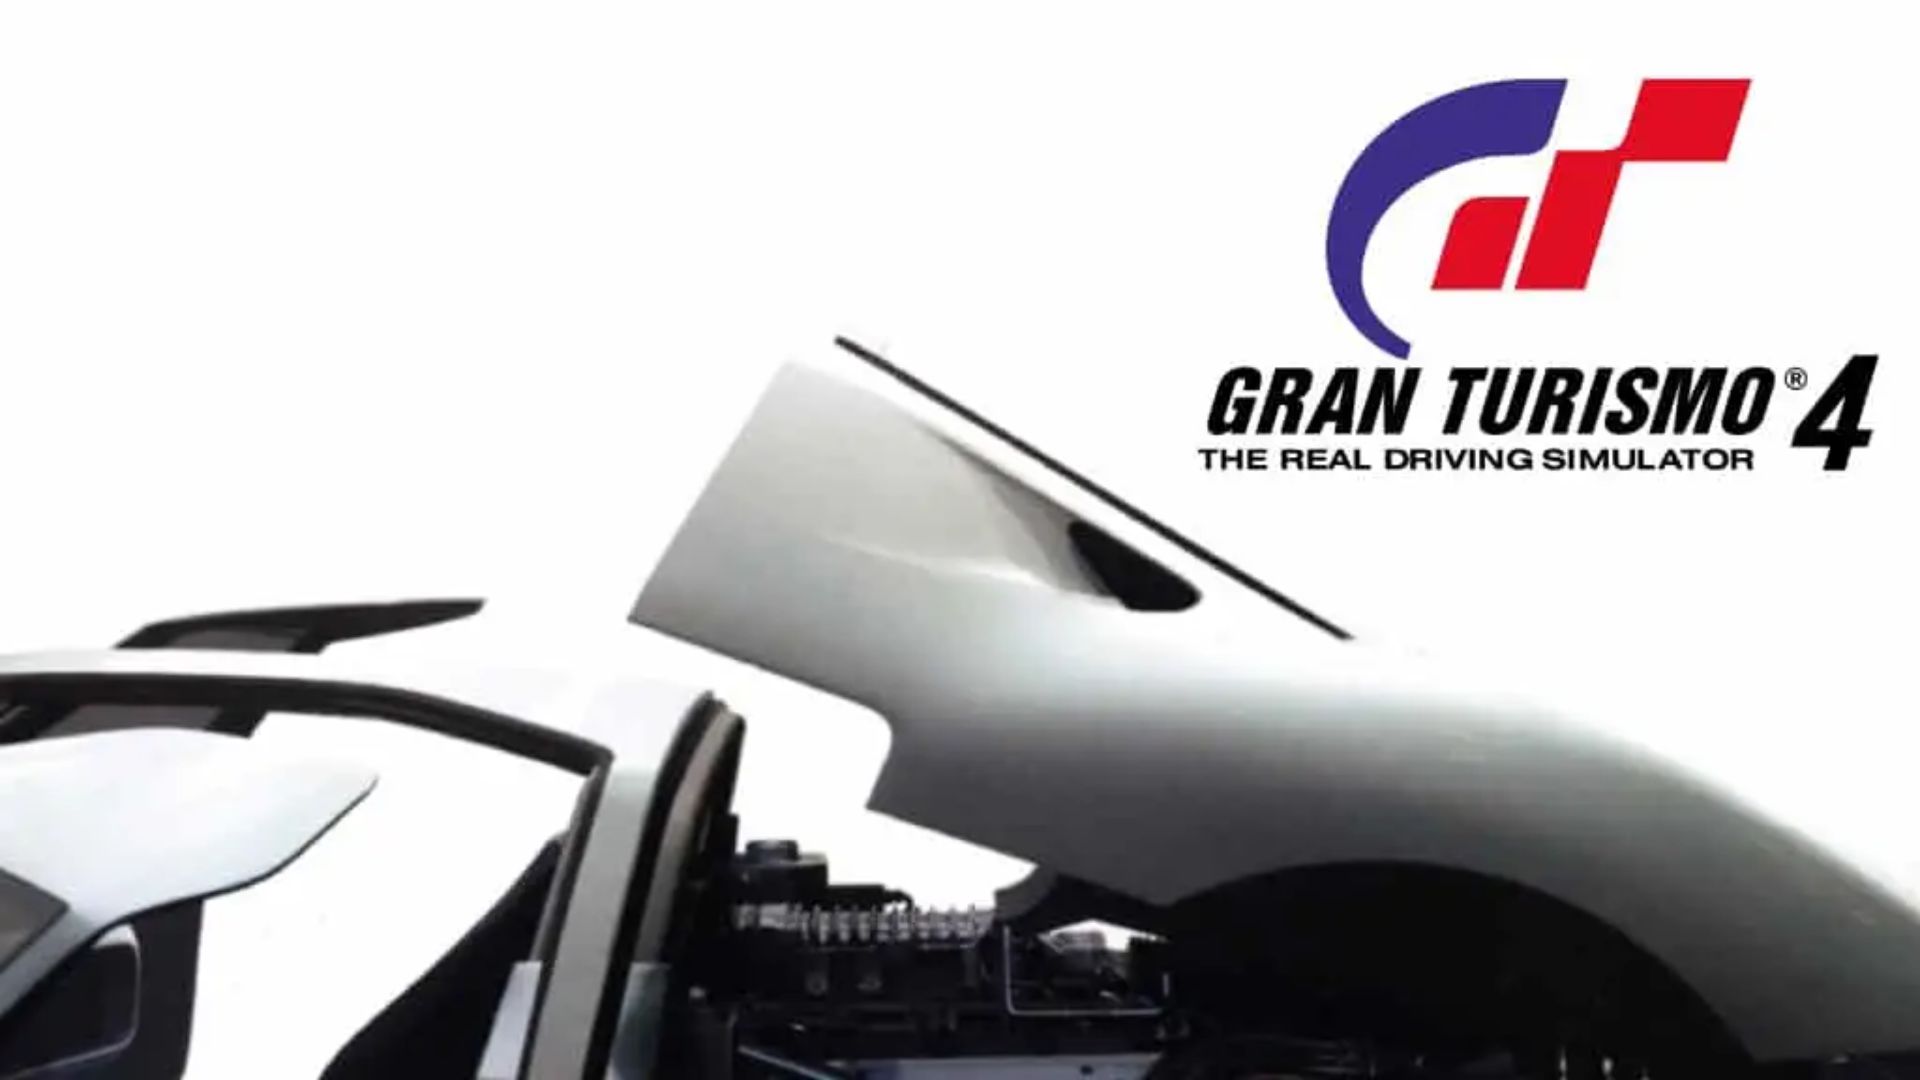 Gran Turismo 4 Cheat Codes Discovered Almost 20 Years Following Release